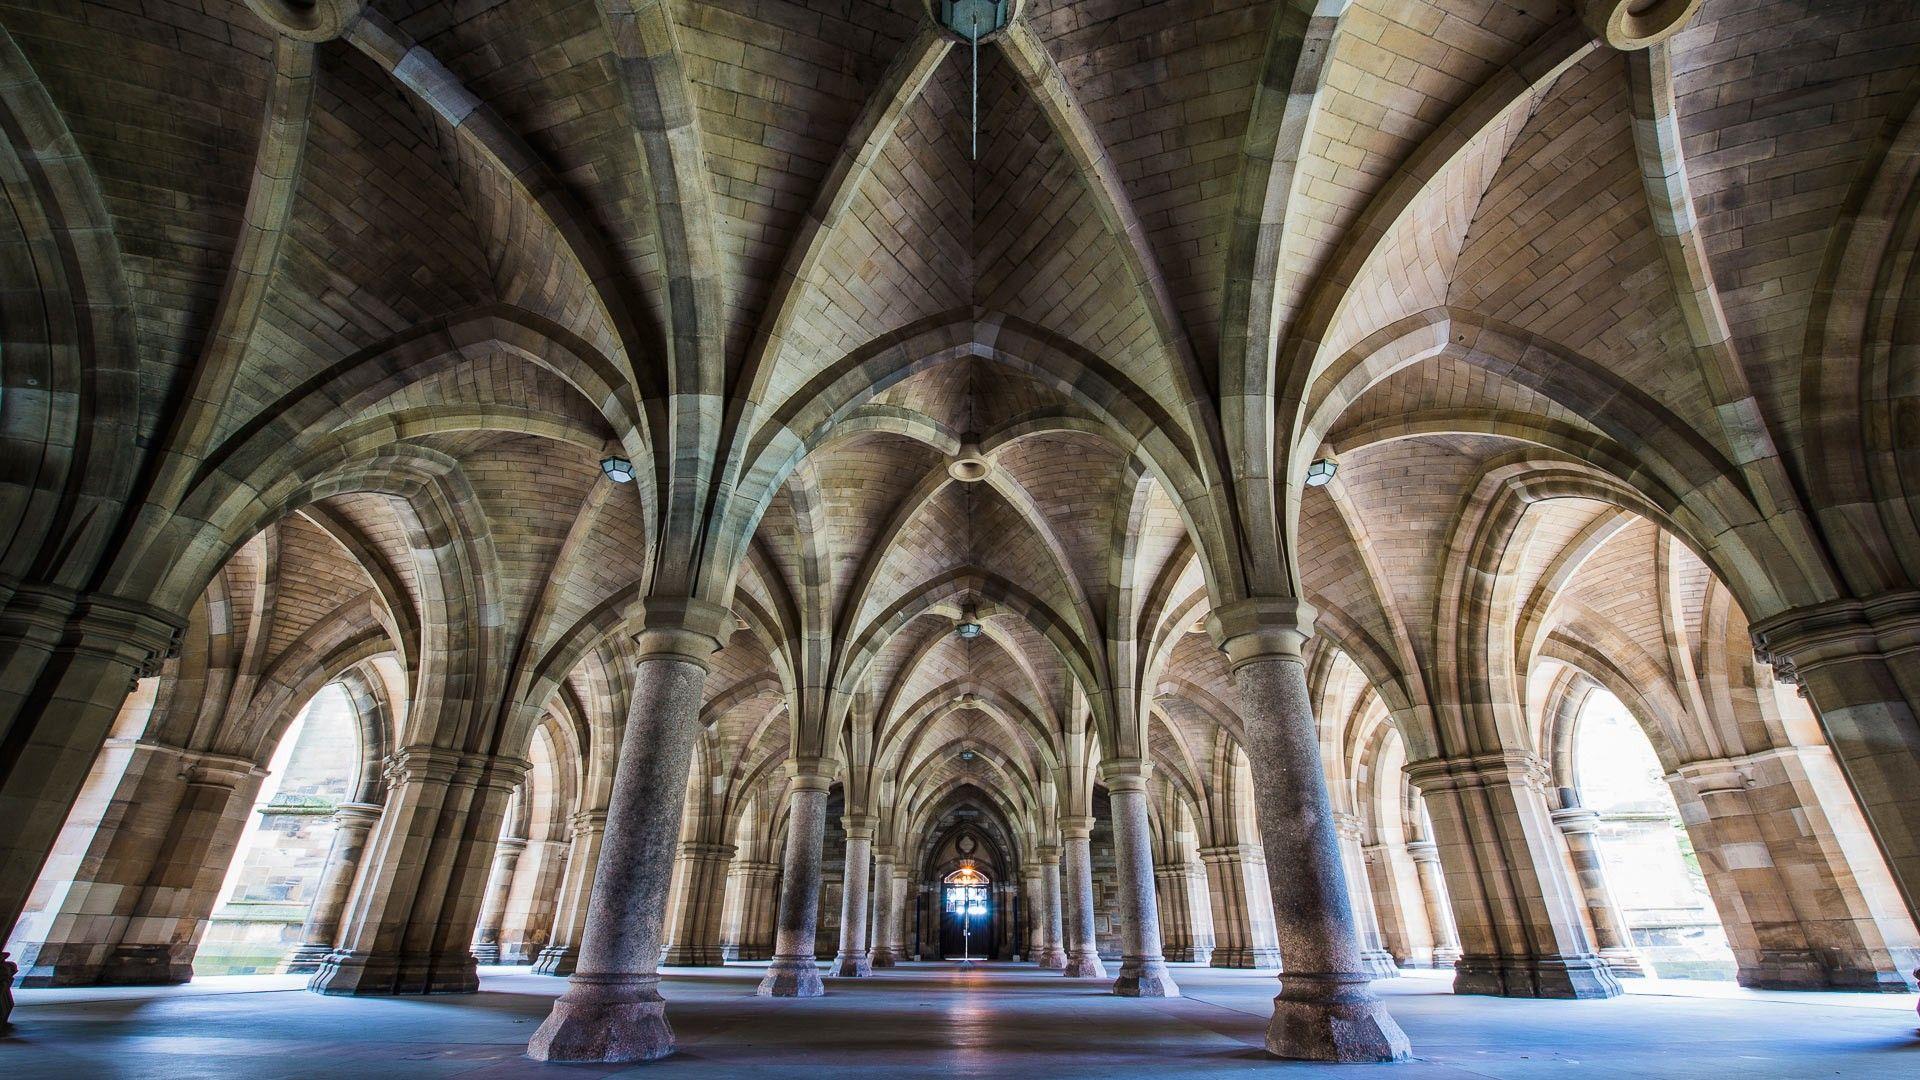 Wallpaper, building, symmetry, arch, church, arcade, cathedral